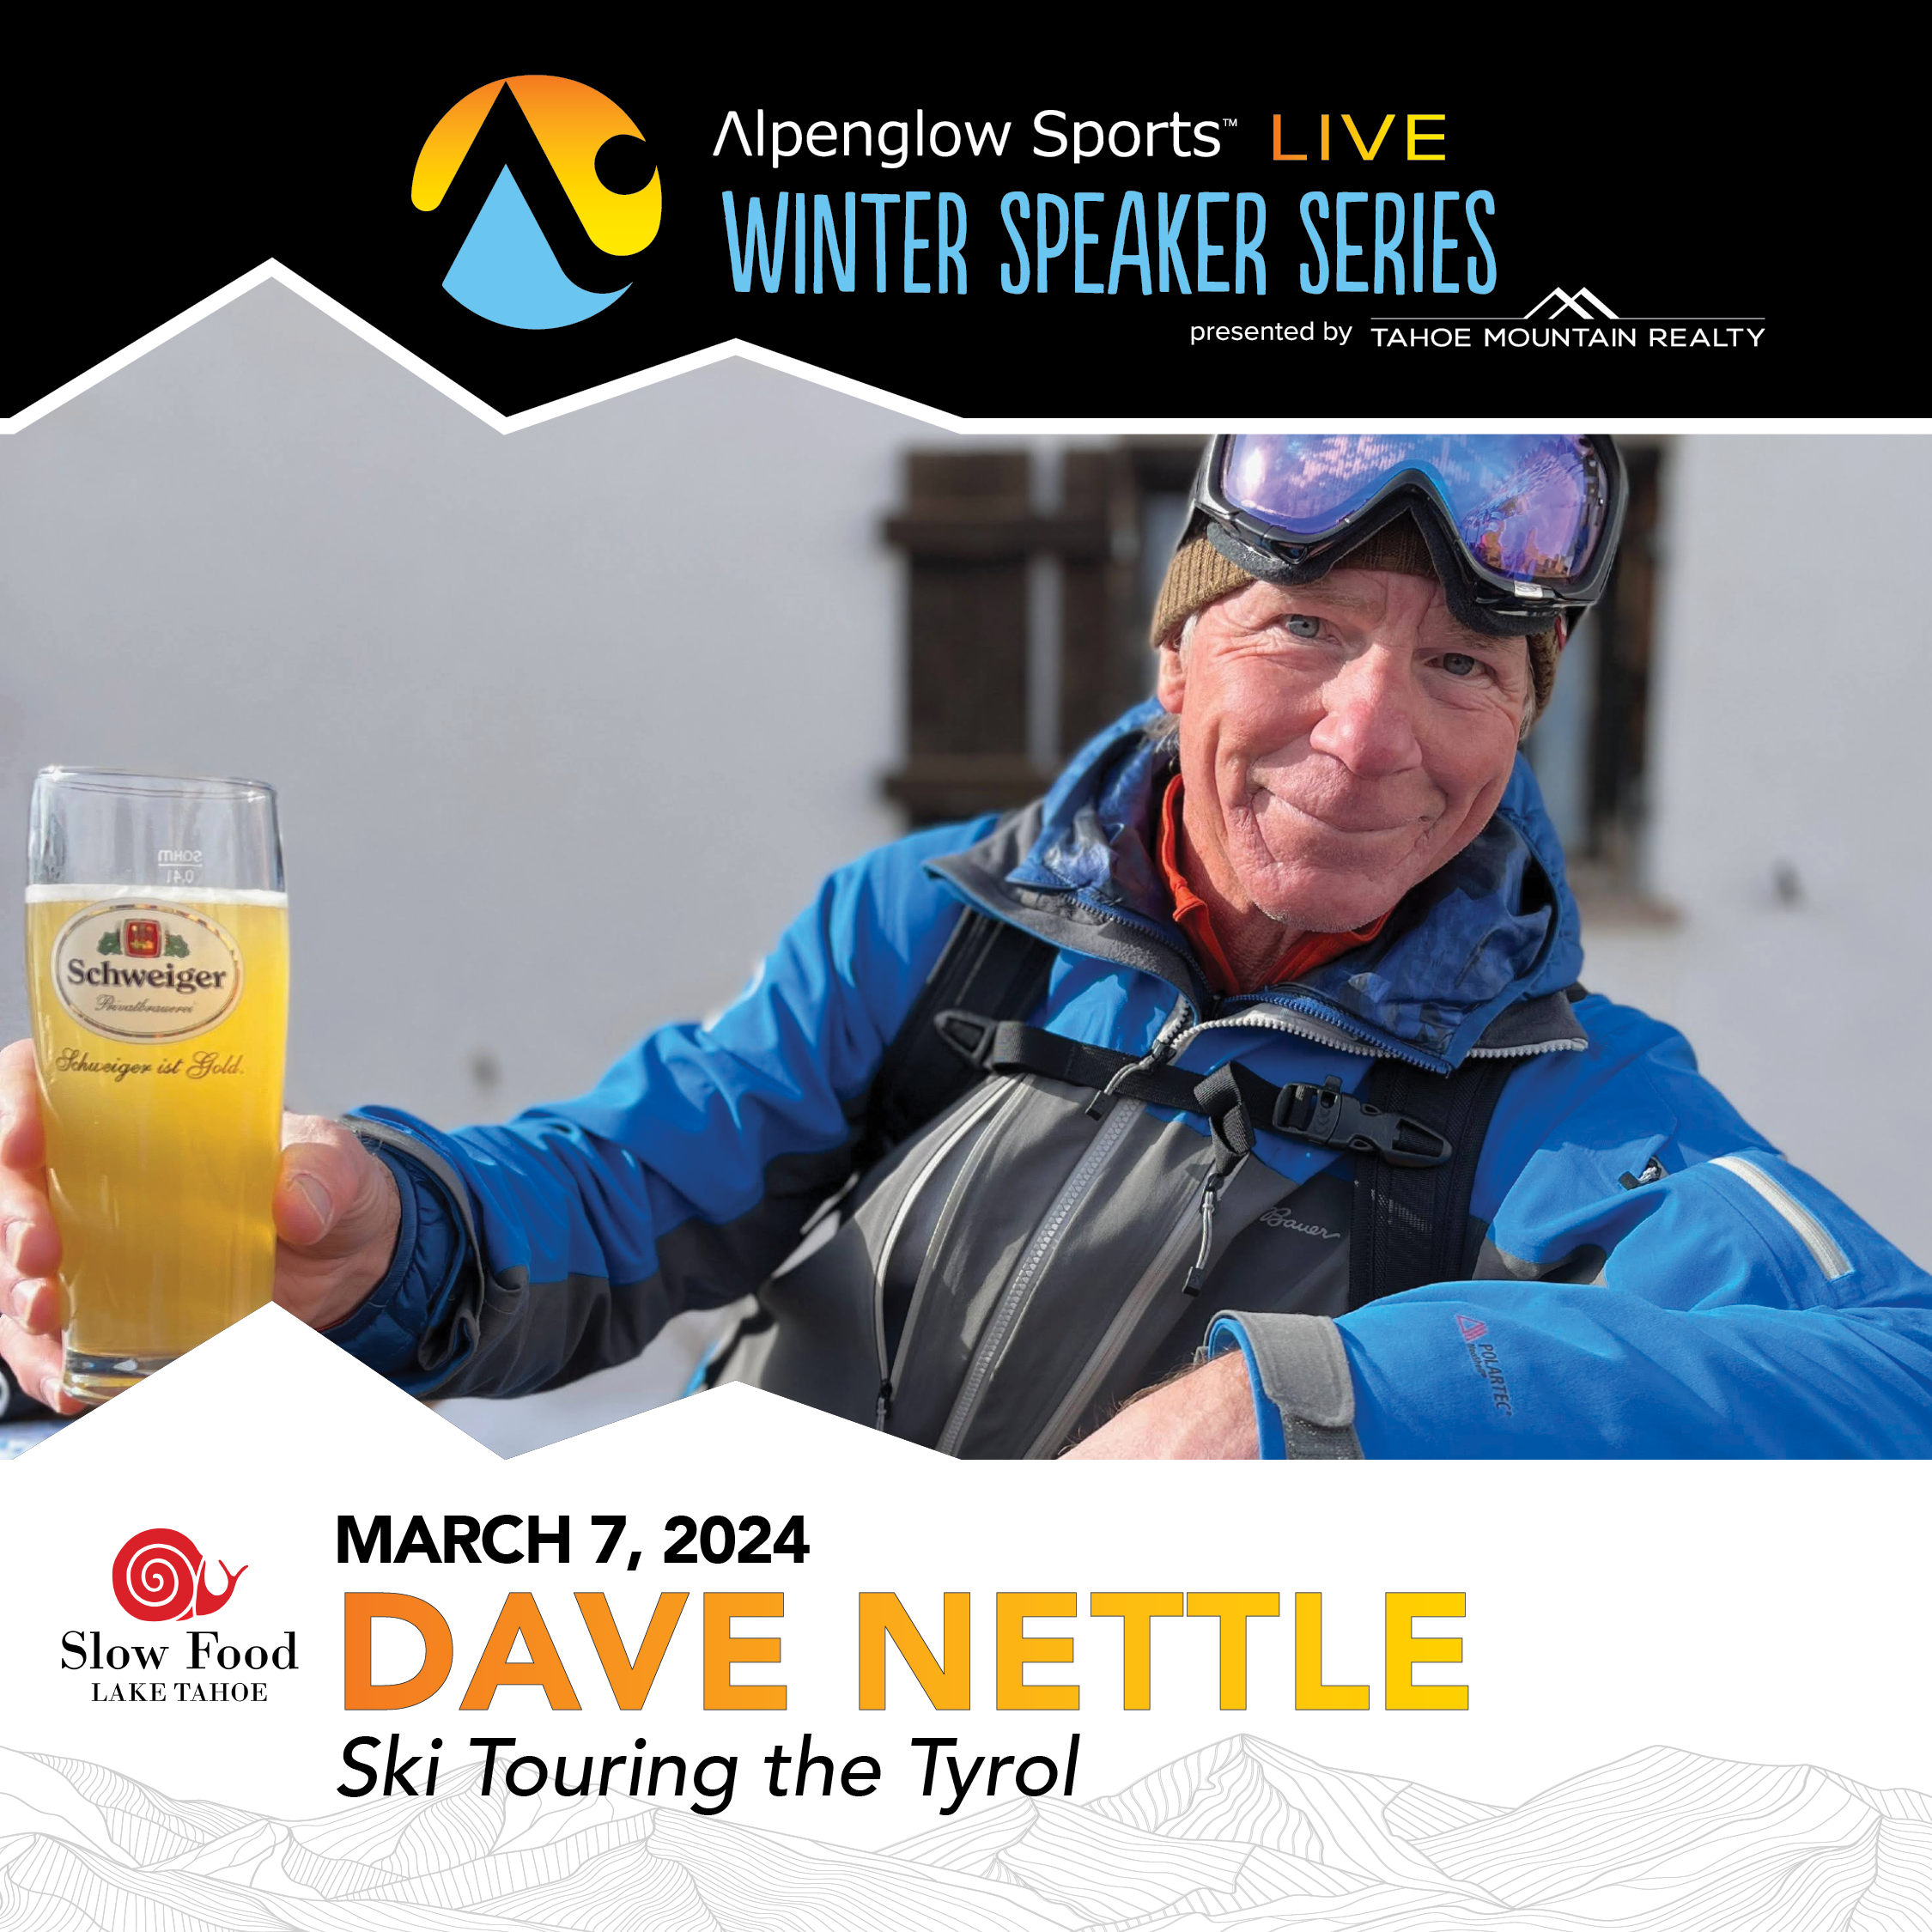 MARCH 7, 2024 DAVE NETTLE Ski Touring the Tyrol